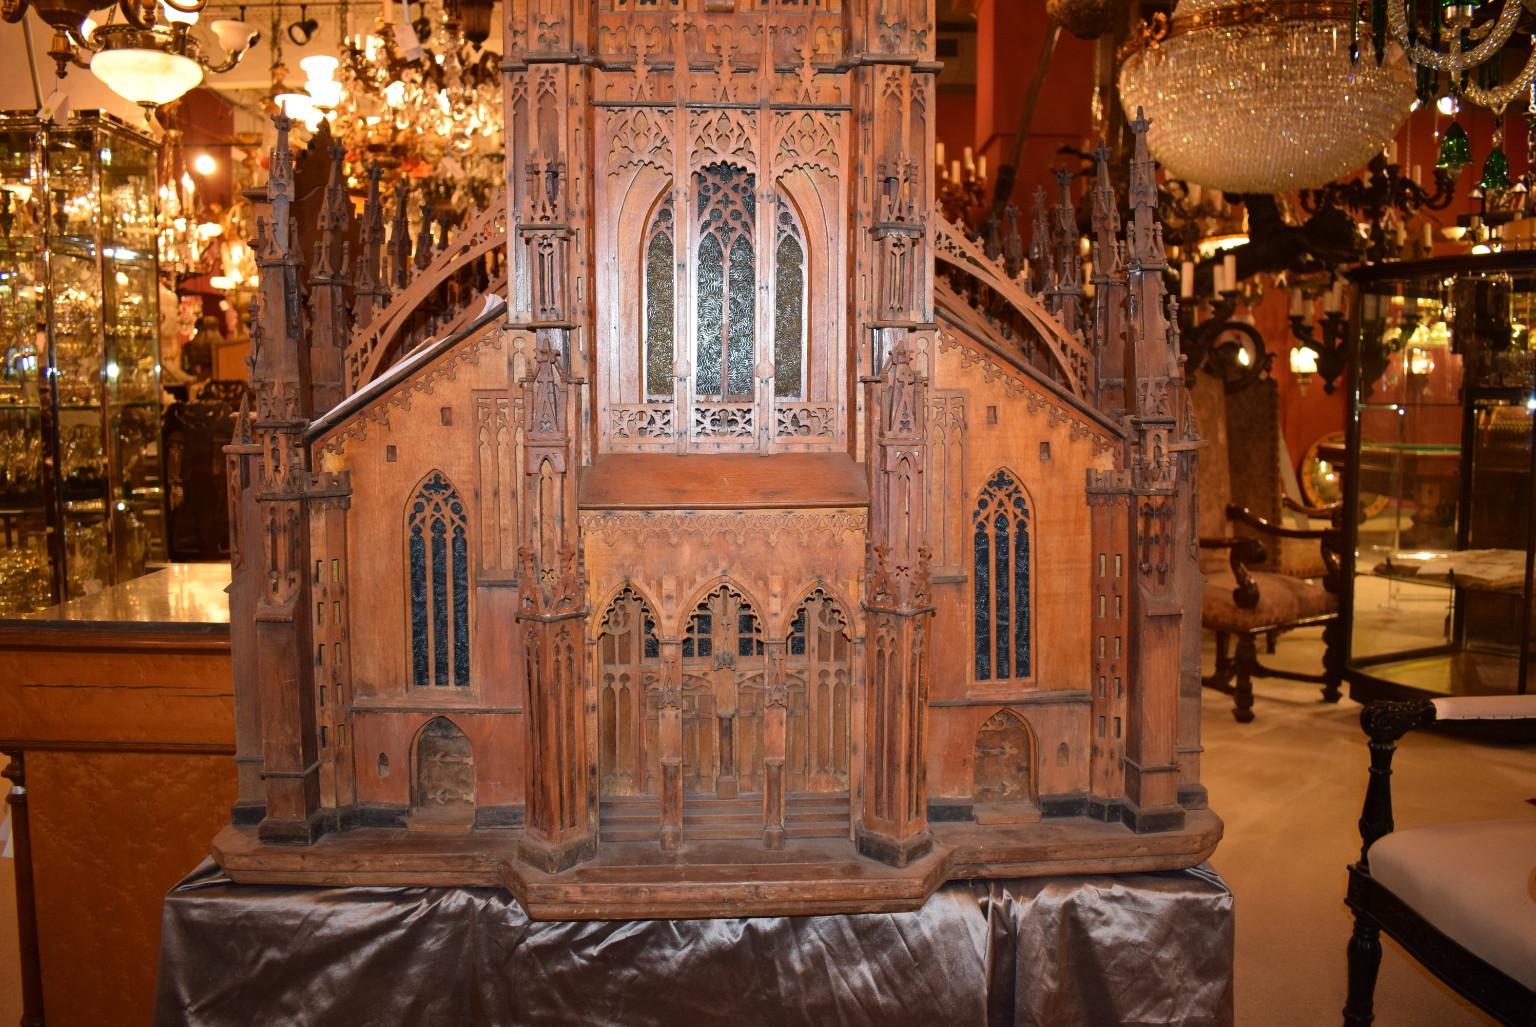 Stunning and rare scale model of the Ulm Cathedral, completed in 1925 by Michael Molz of Los Angeles. It is in remarkably good condition and features stained glass windows. 
The Ulm Minster is located in Ulm, Germany and at this time is the tallest